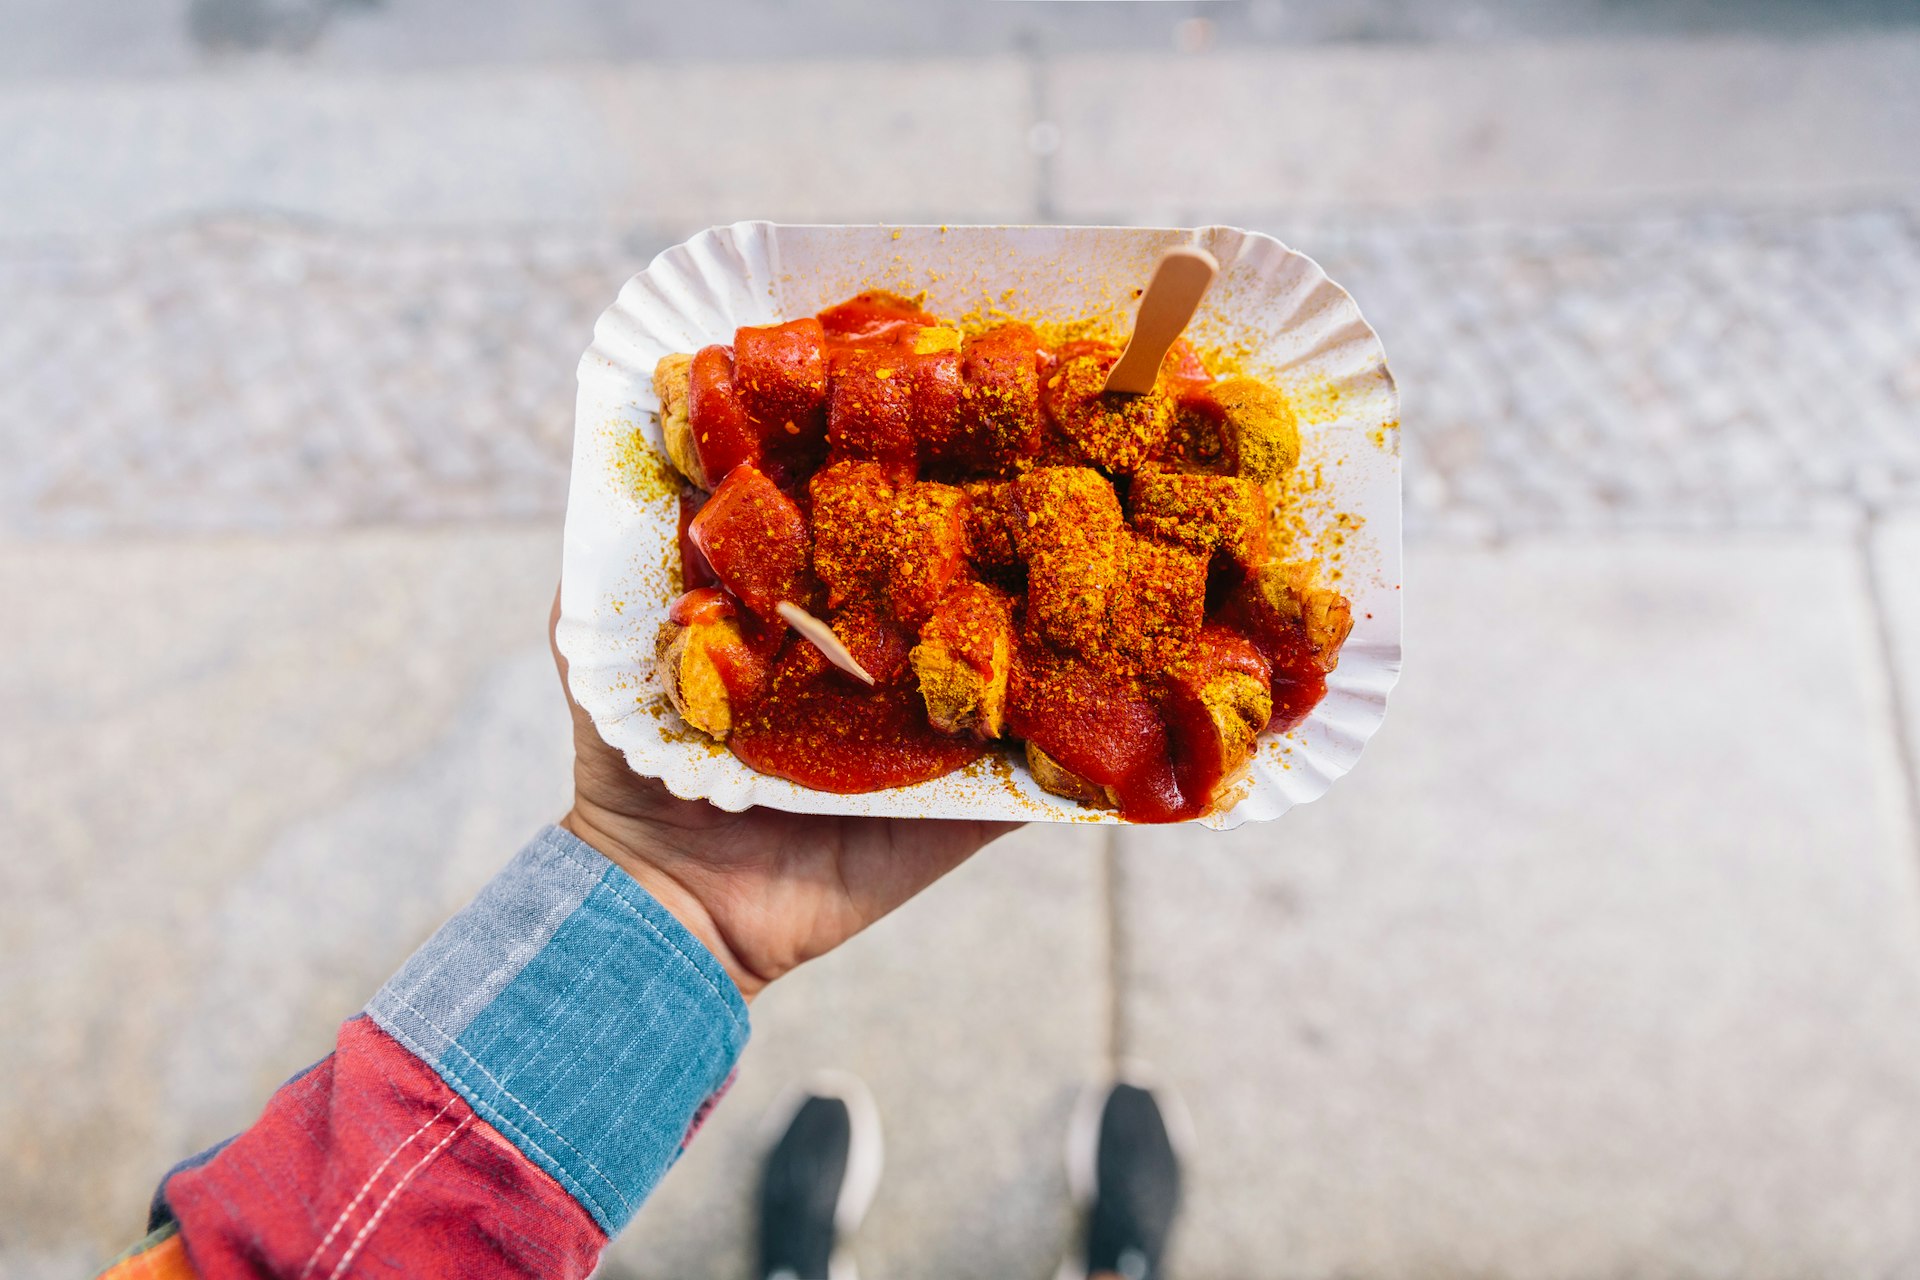 A hand holds out a small takeaway plate of curried sausage with a wooden fork